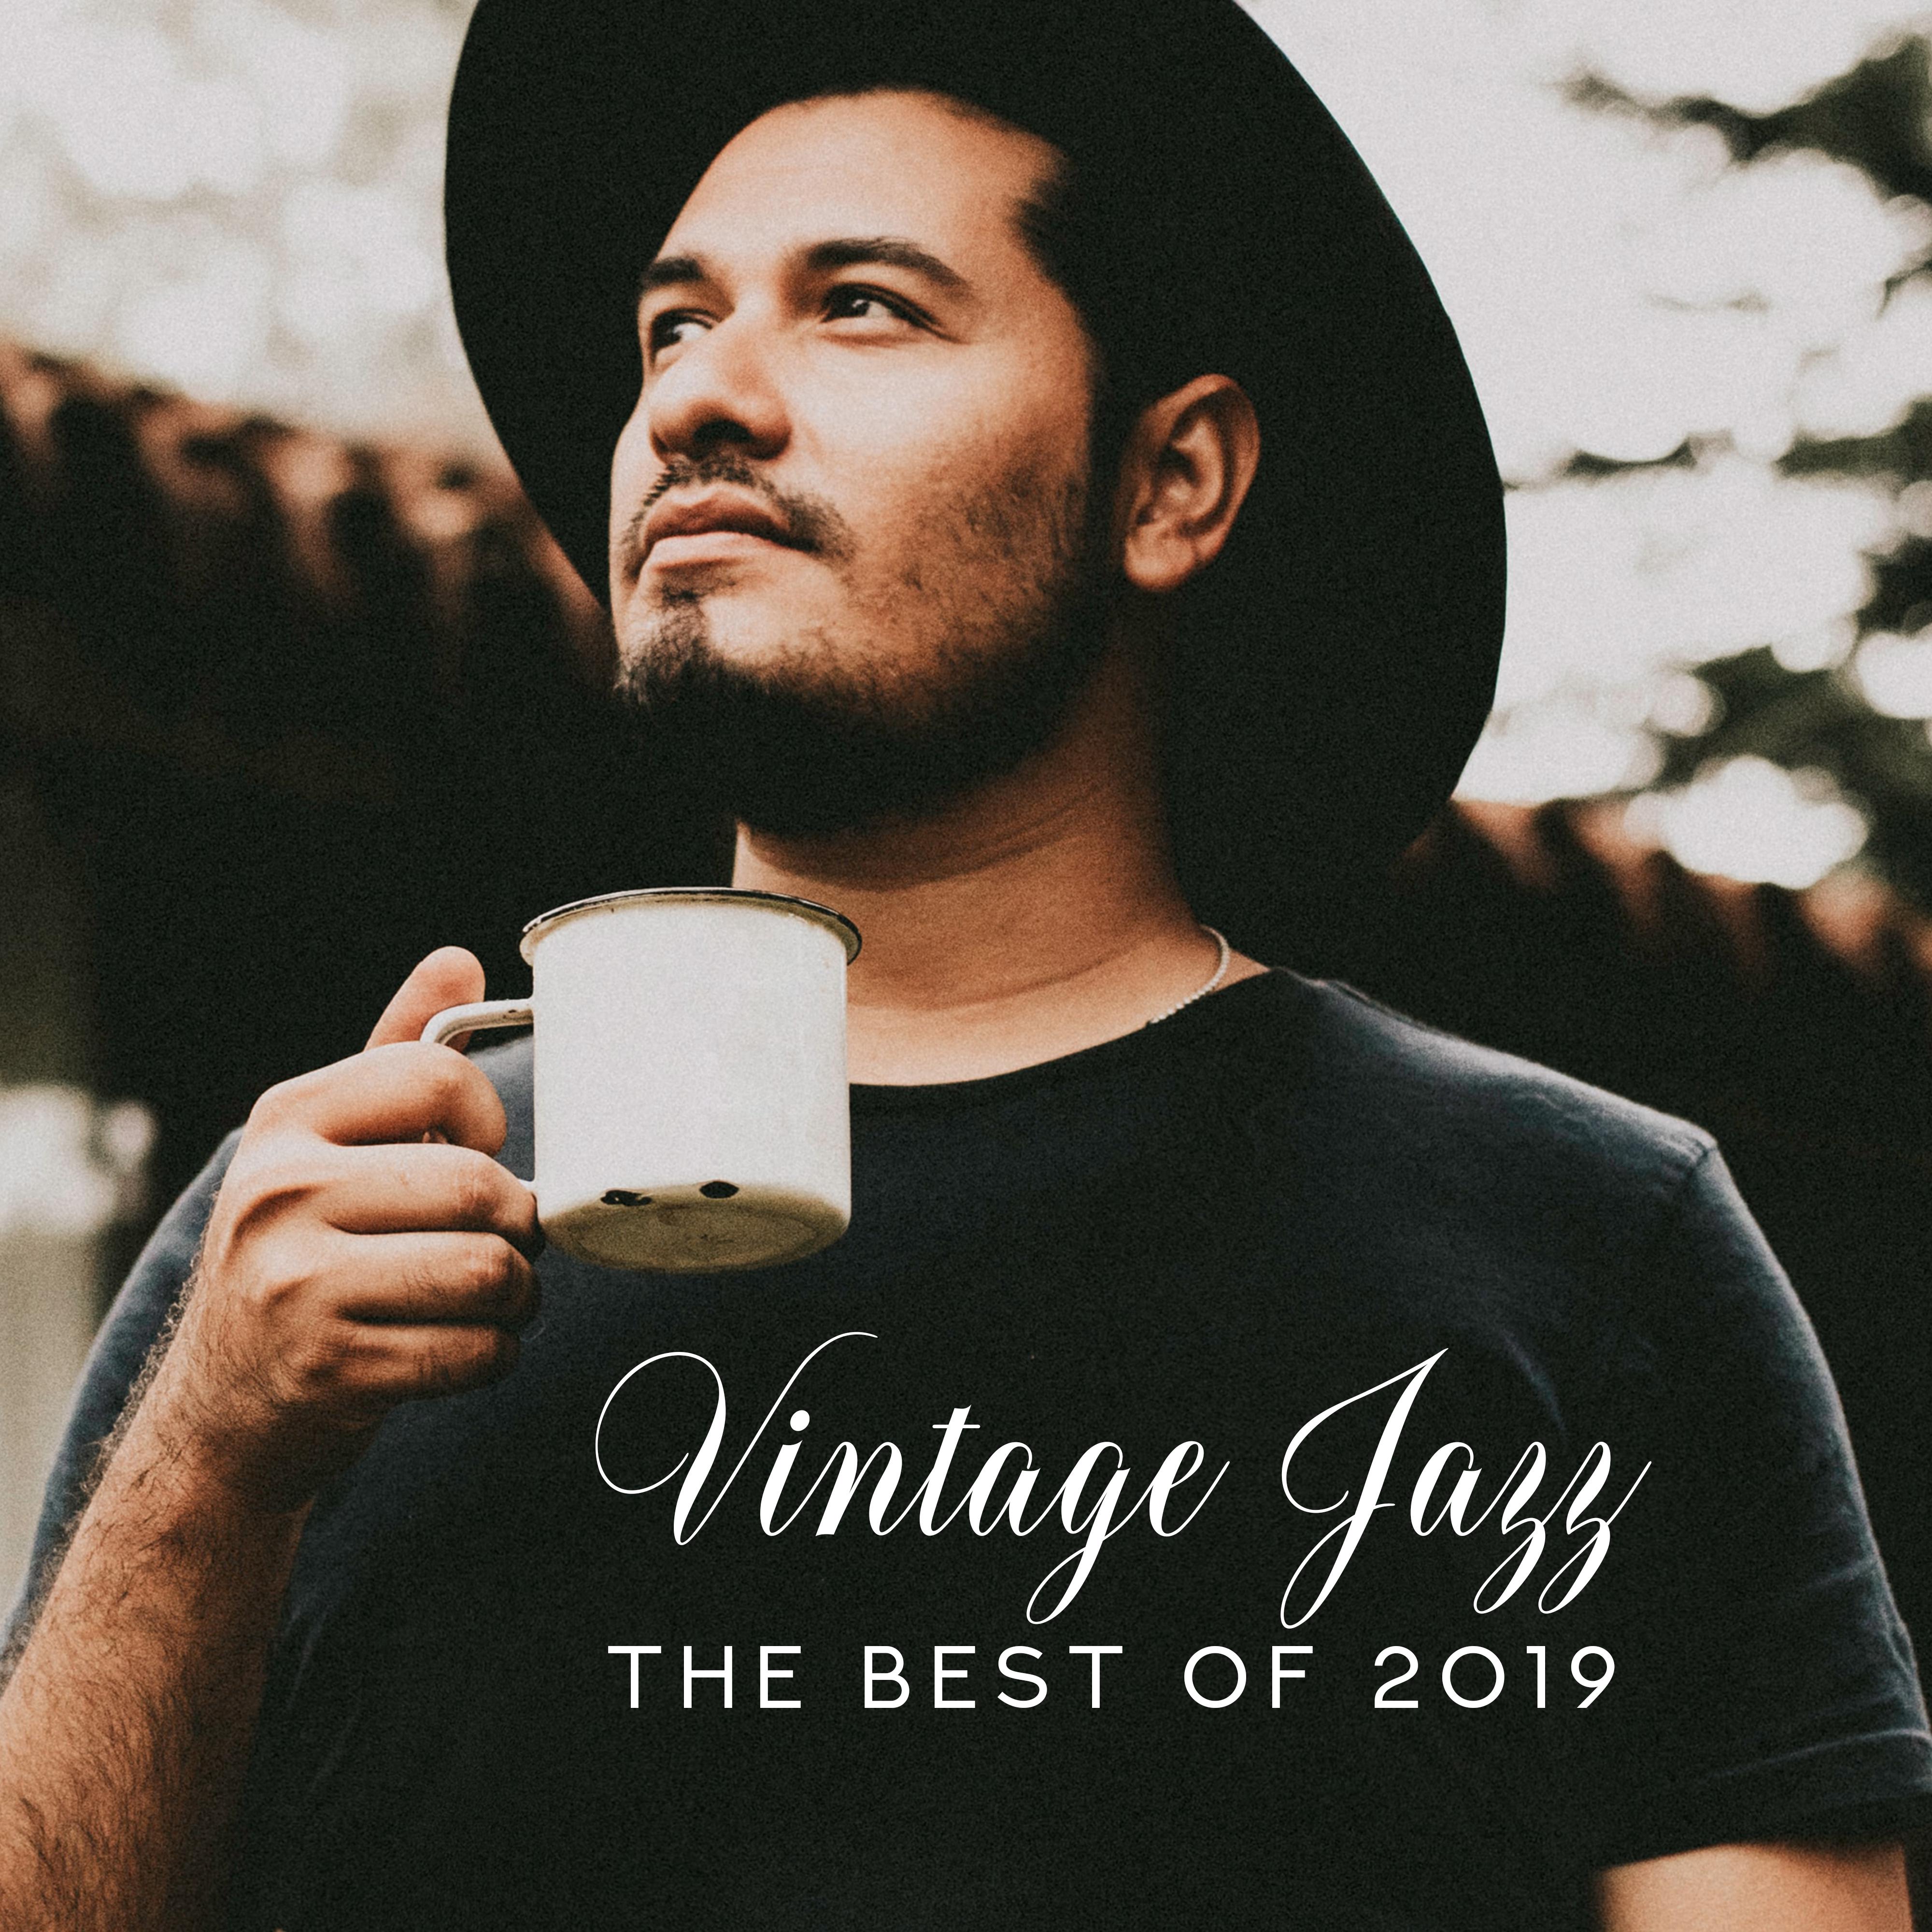 Vintage Jazz – The Best of 2019: Compilation of Best Swing Instrumental Jazz Music, Happy Vintage Songs for Oldschool Dance Party, Mesmerizing Sounds of Piano, Contrabass, Sax & More